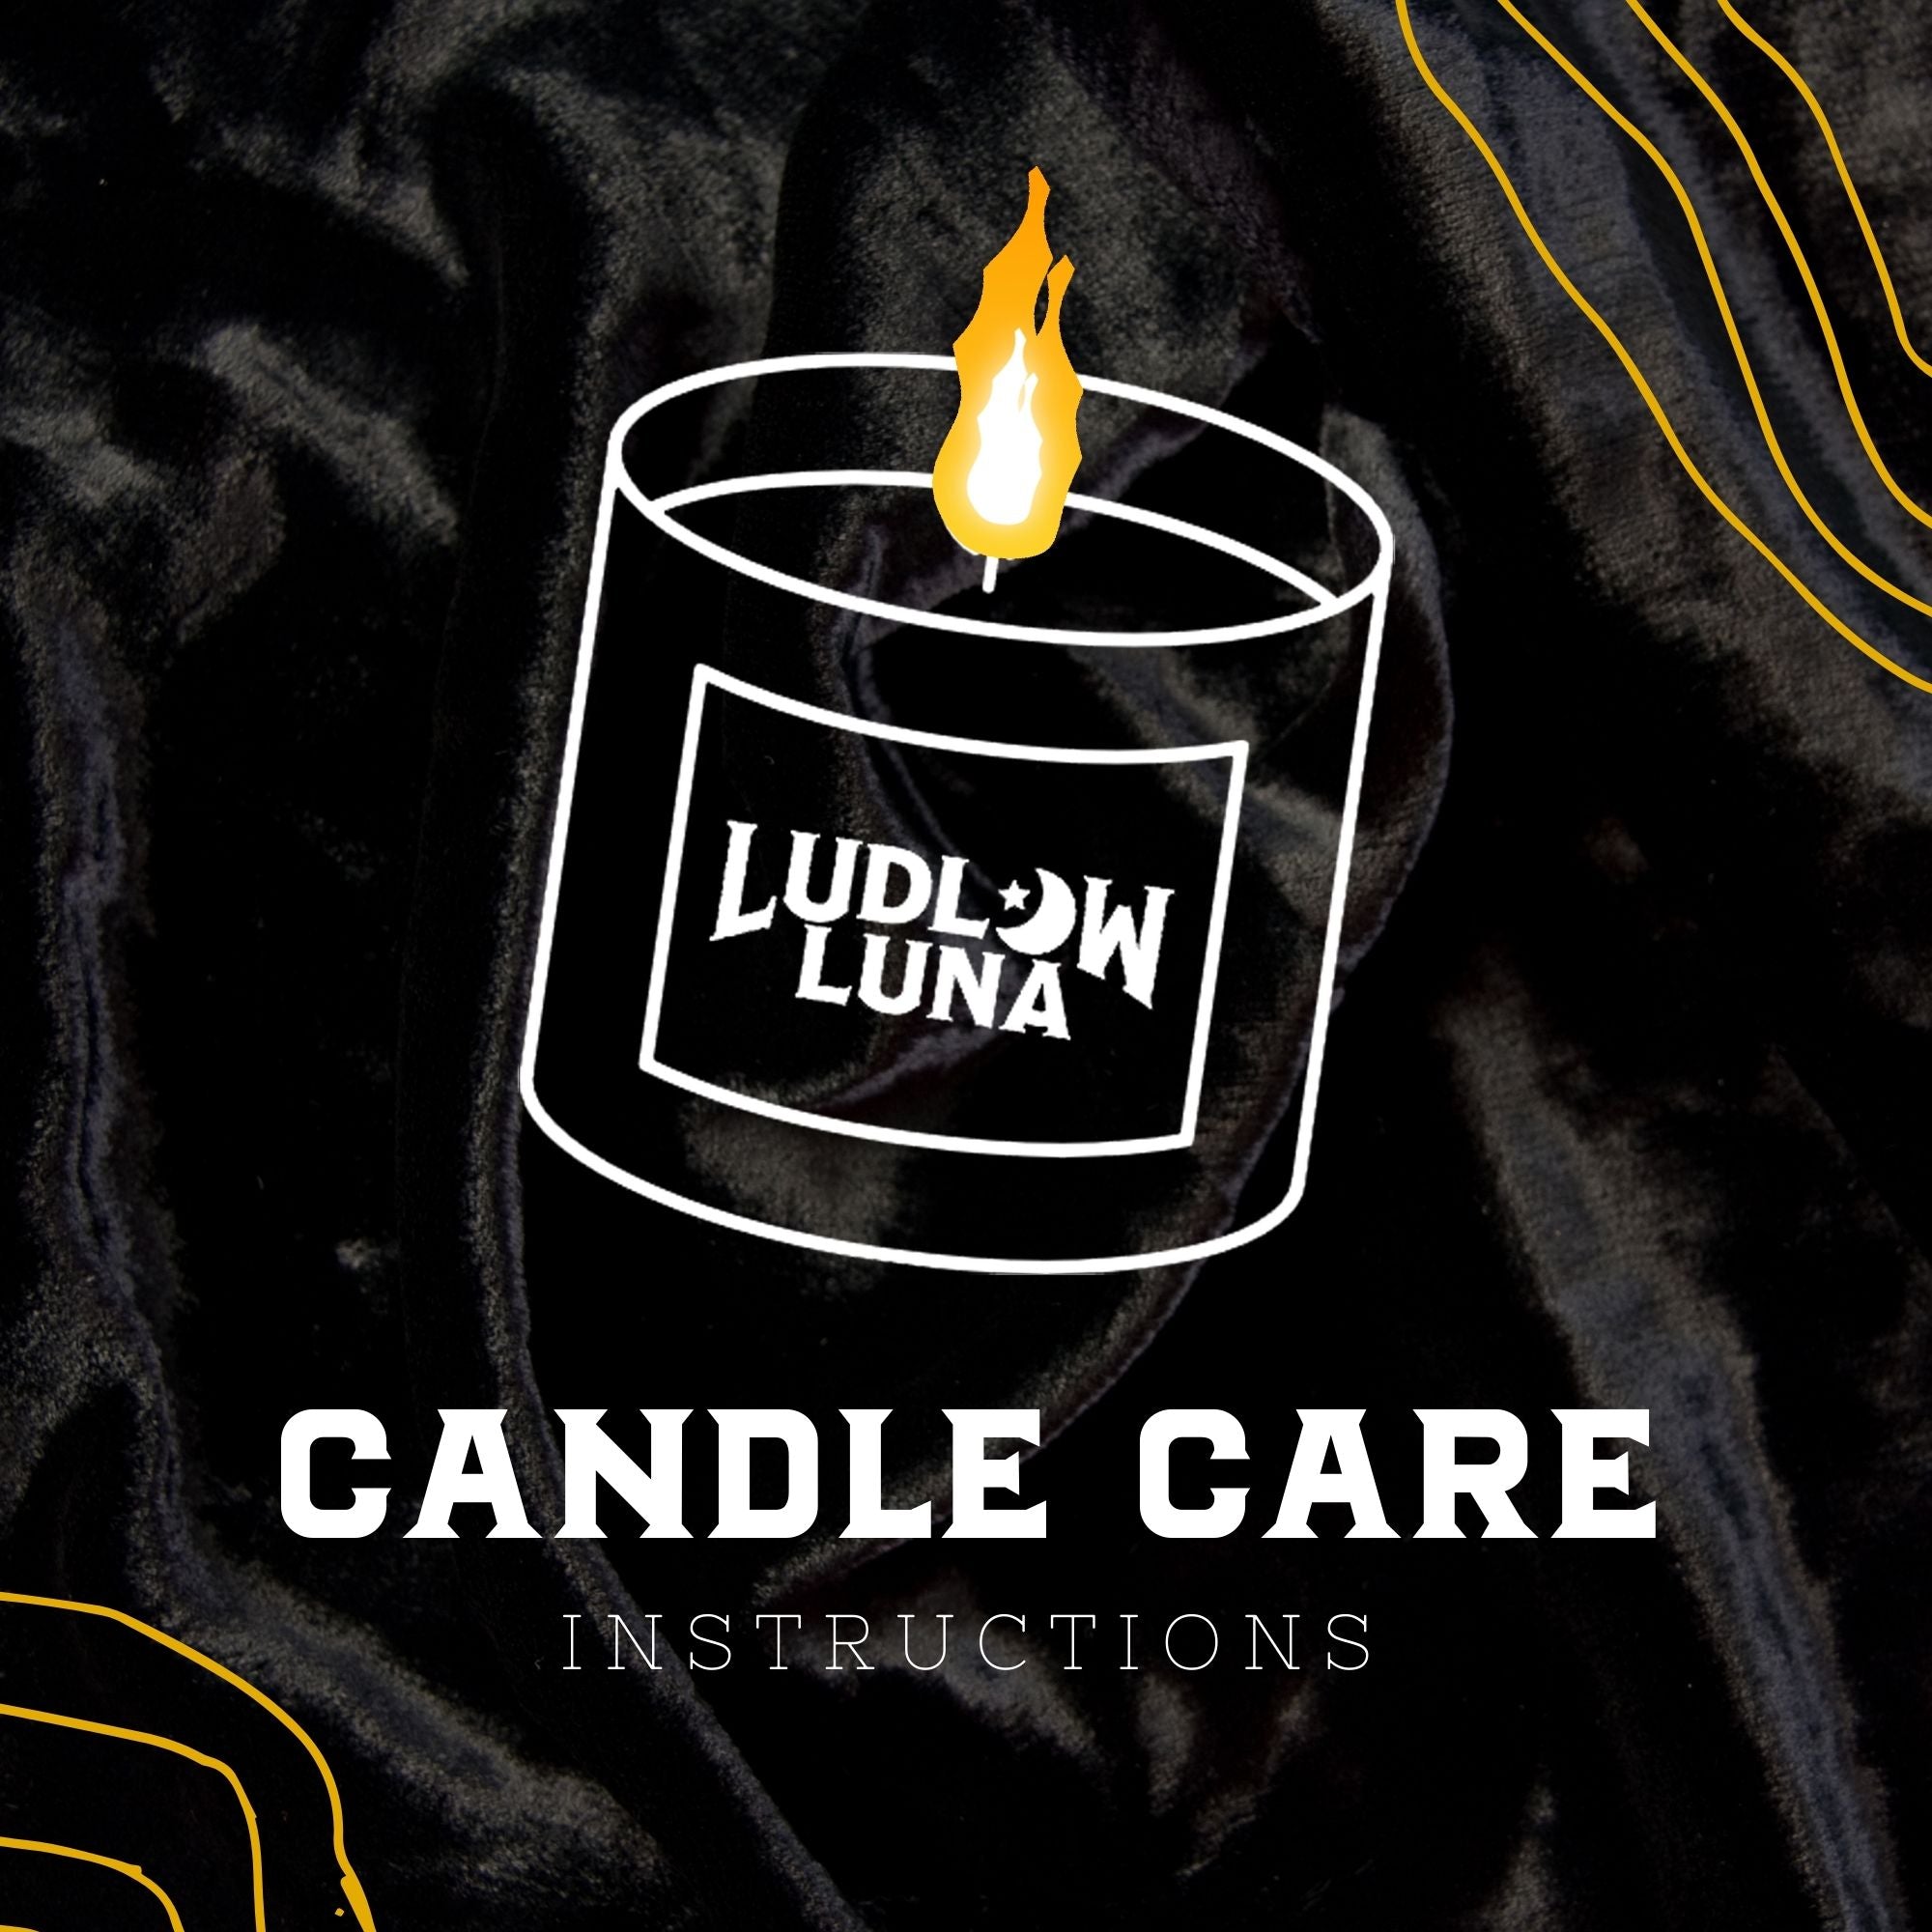 Let's Talk Candle Care